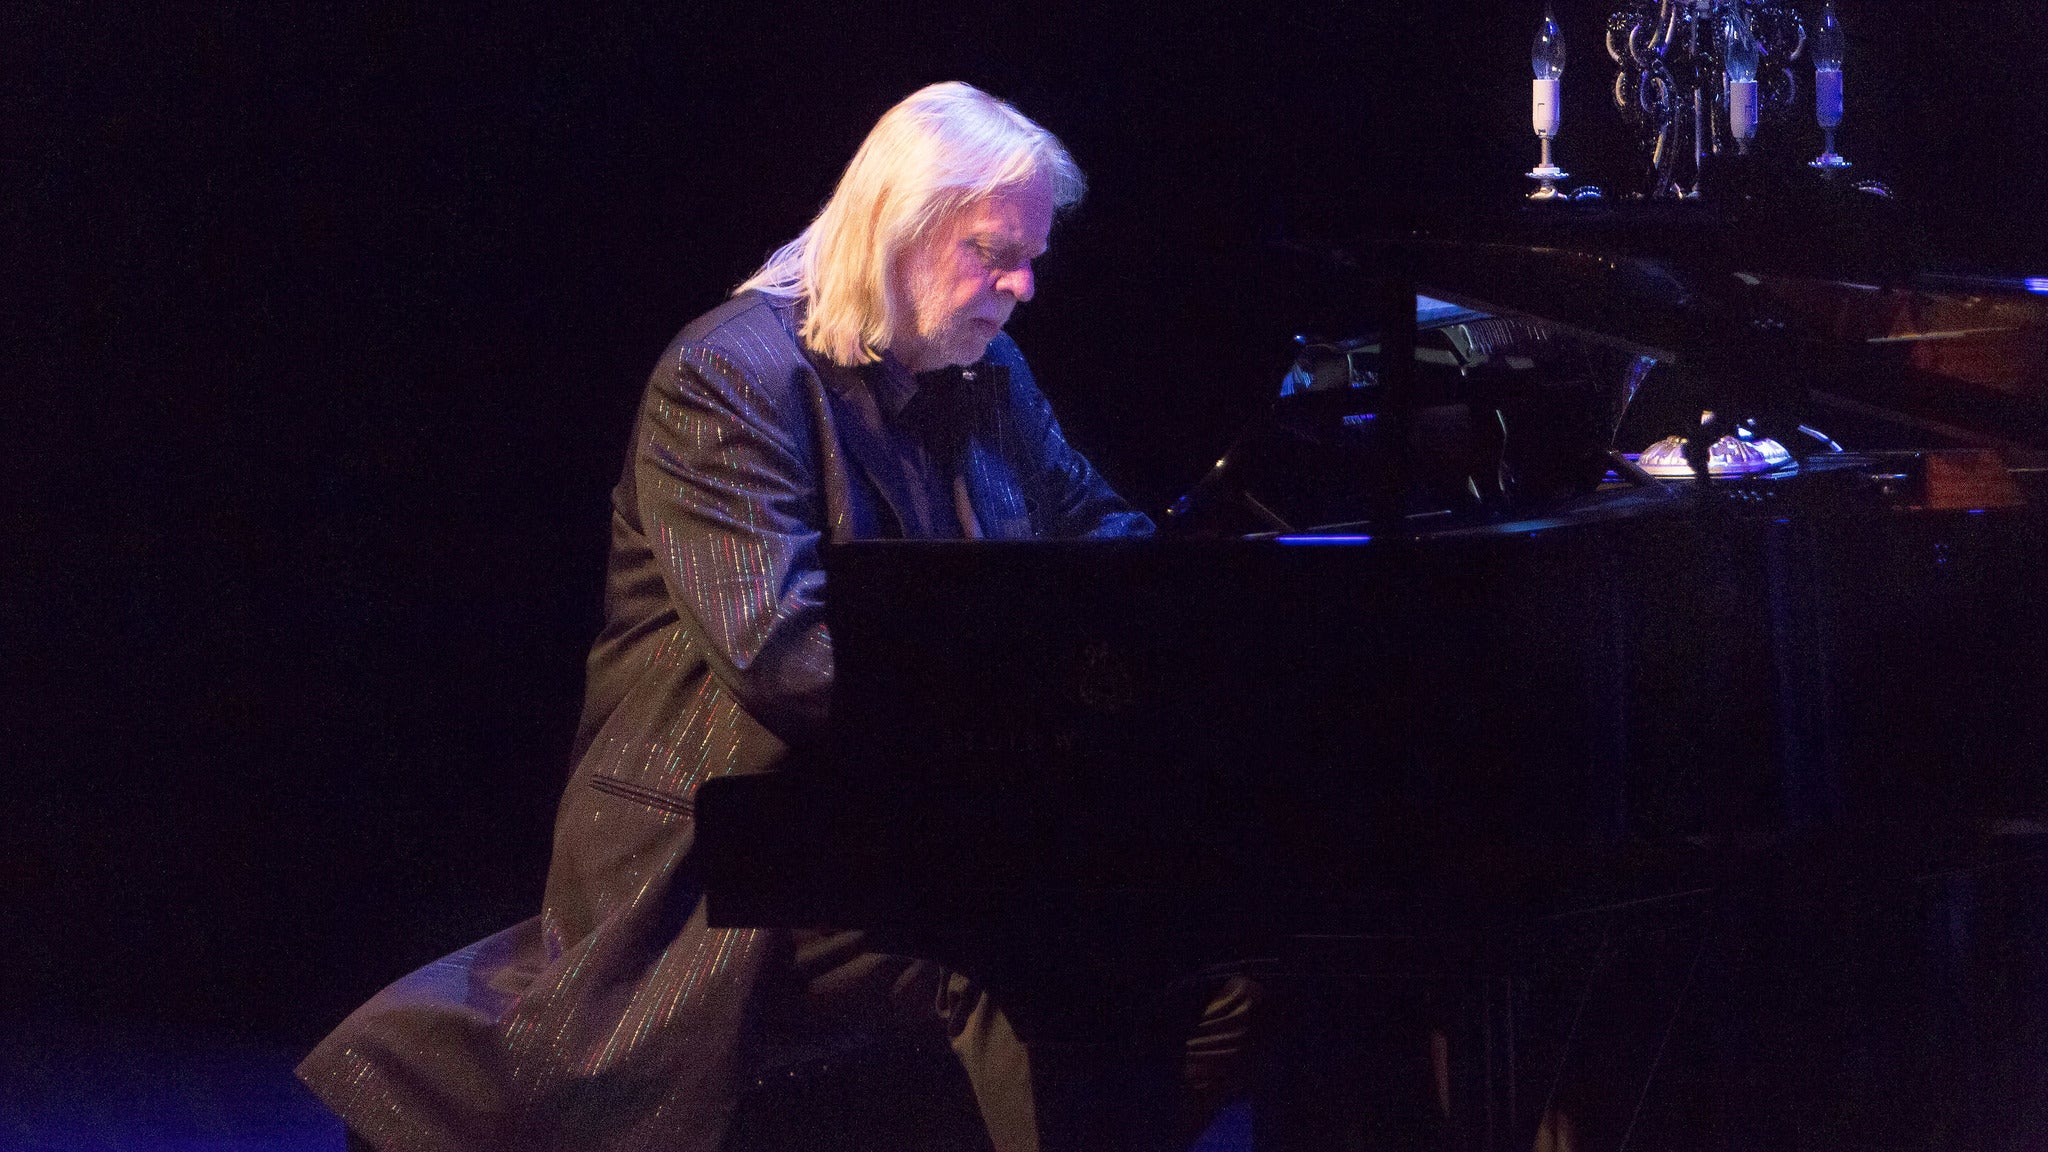 presale password for Rick Wakeman face value tickets in Lititz